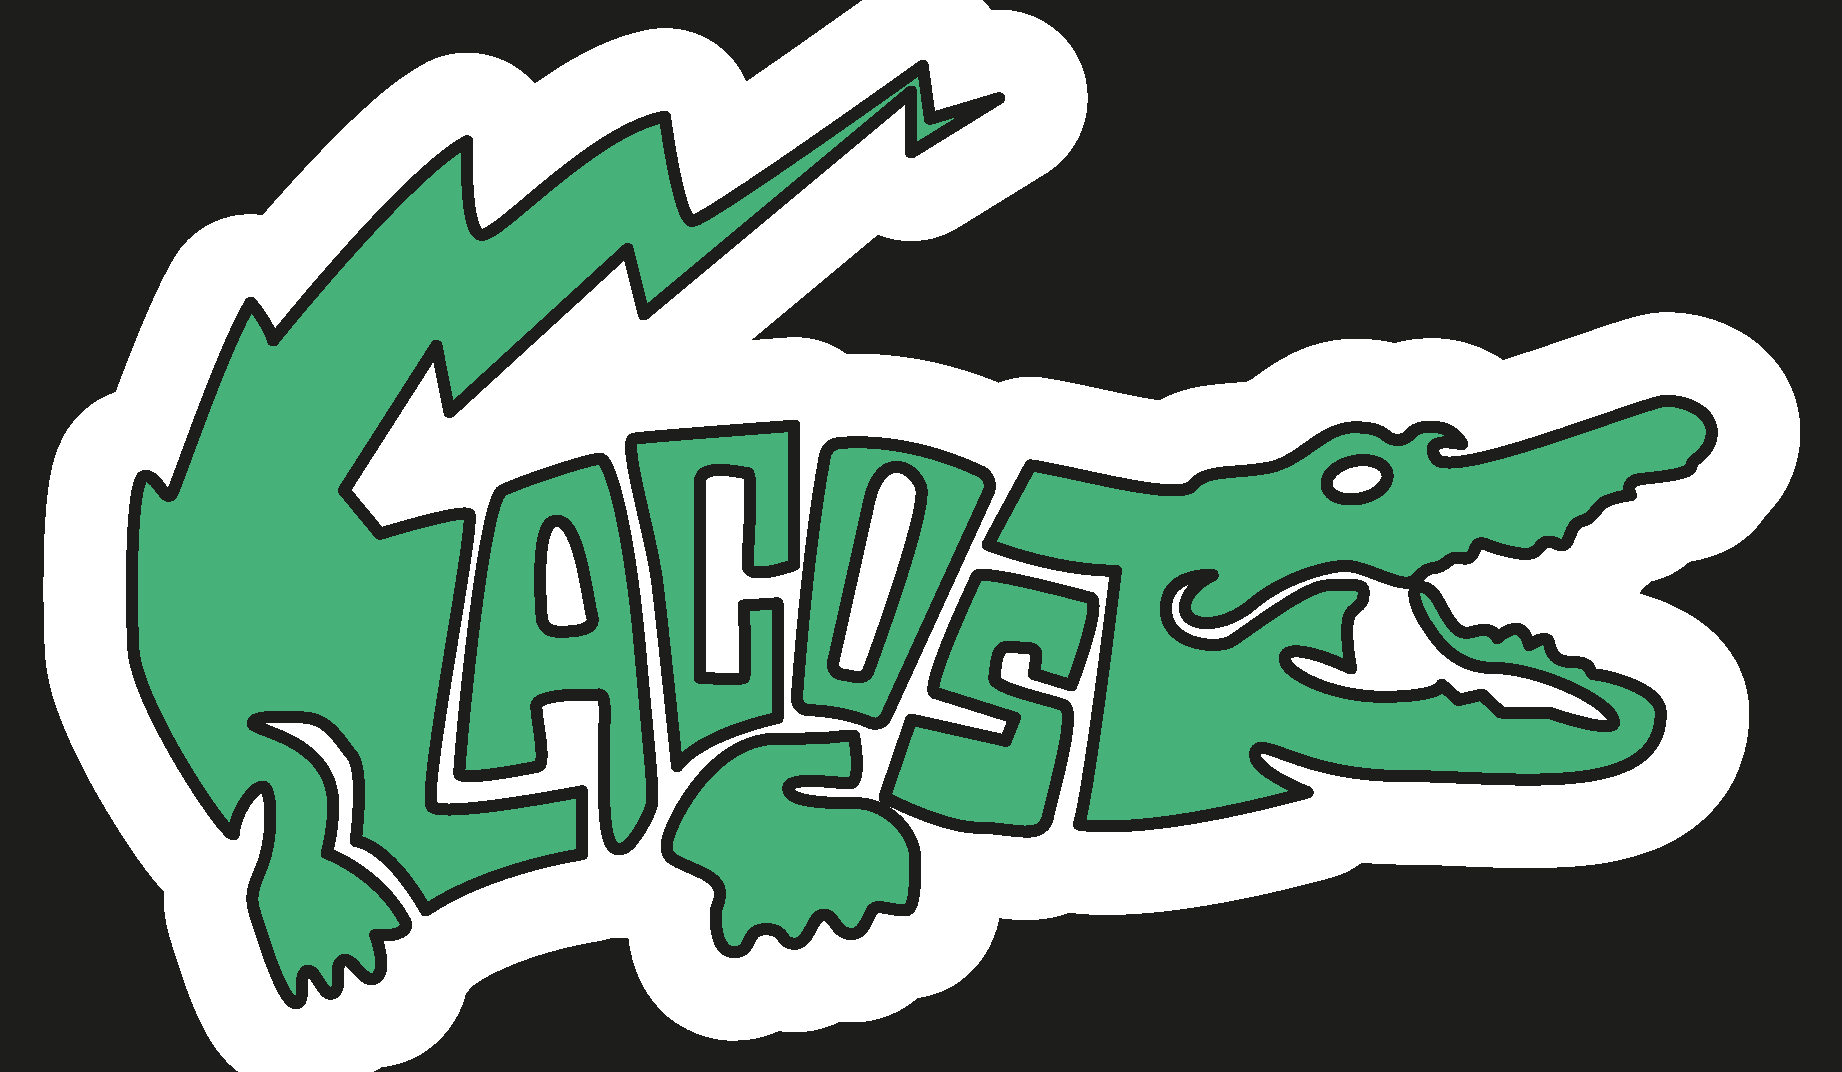 Lacoste Logo PNG Images, Lacoste Logo Clipart Free Download